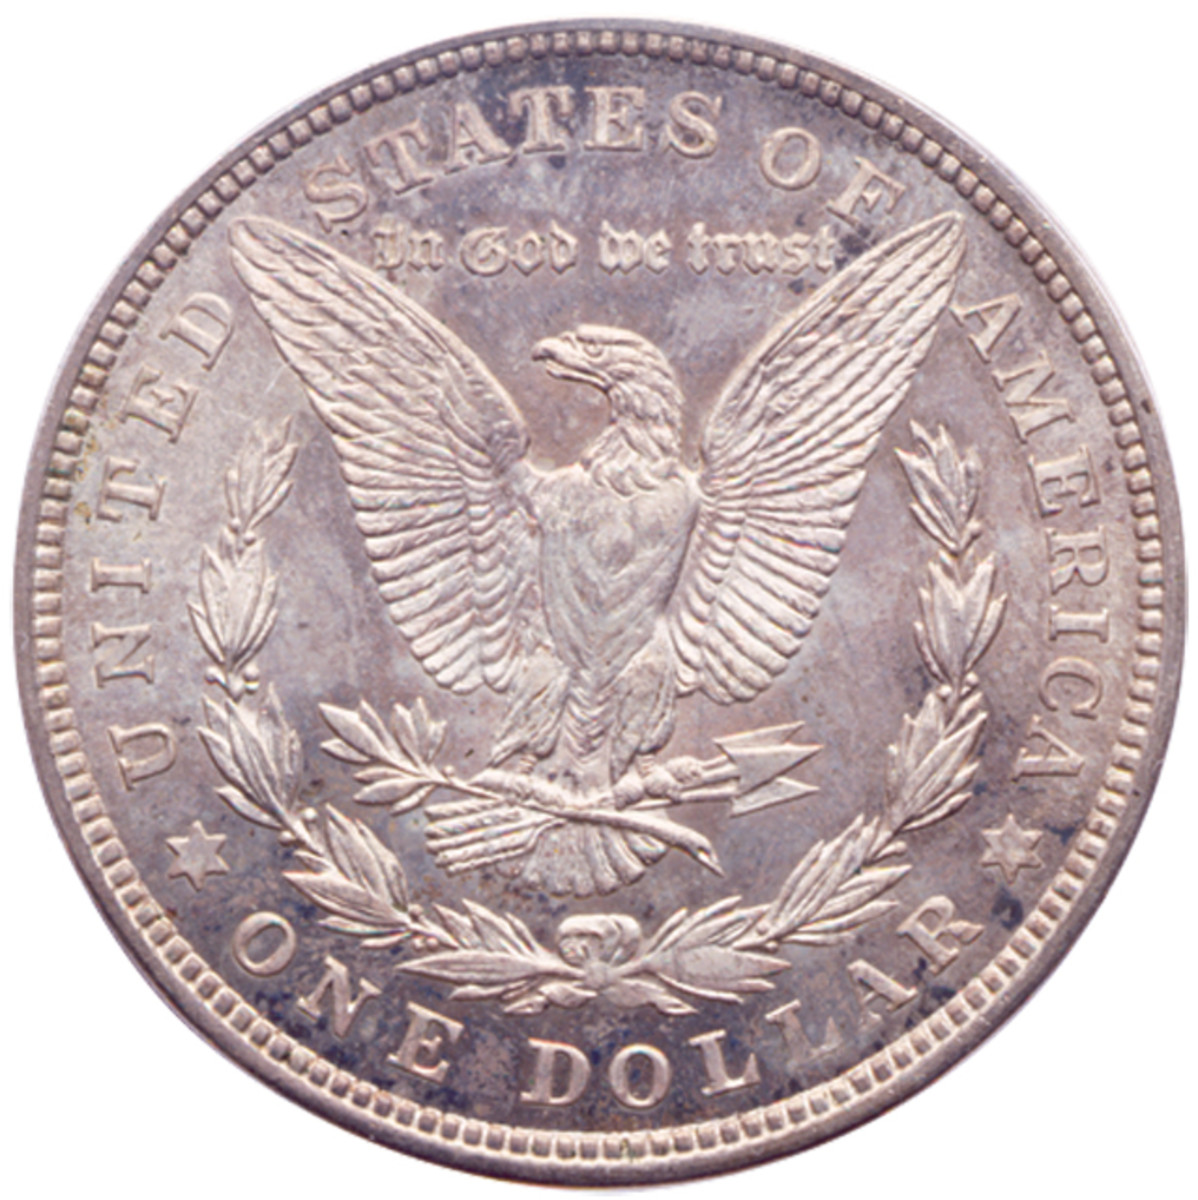 How much are you willing to pay in sales tax on a coin?